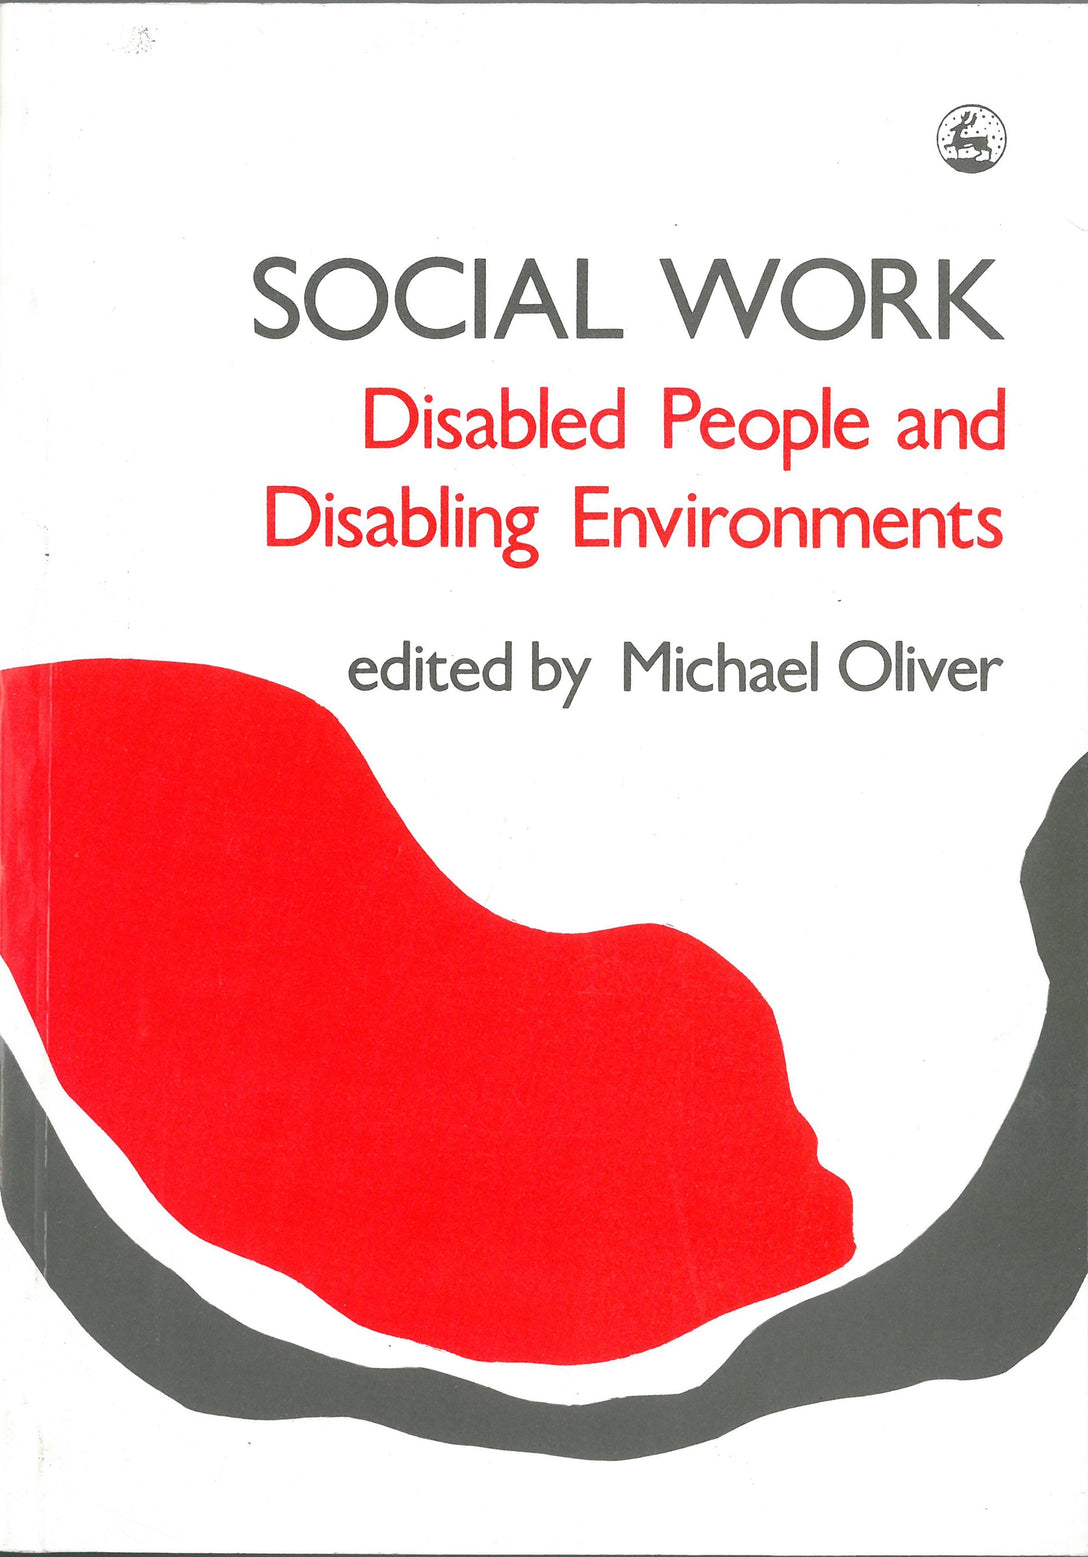 Social Work: Disabled People and Disabling Environments by Michael Oliver